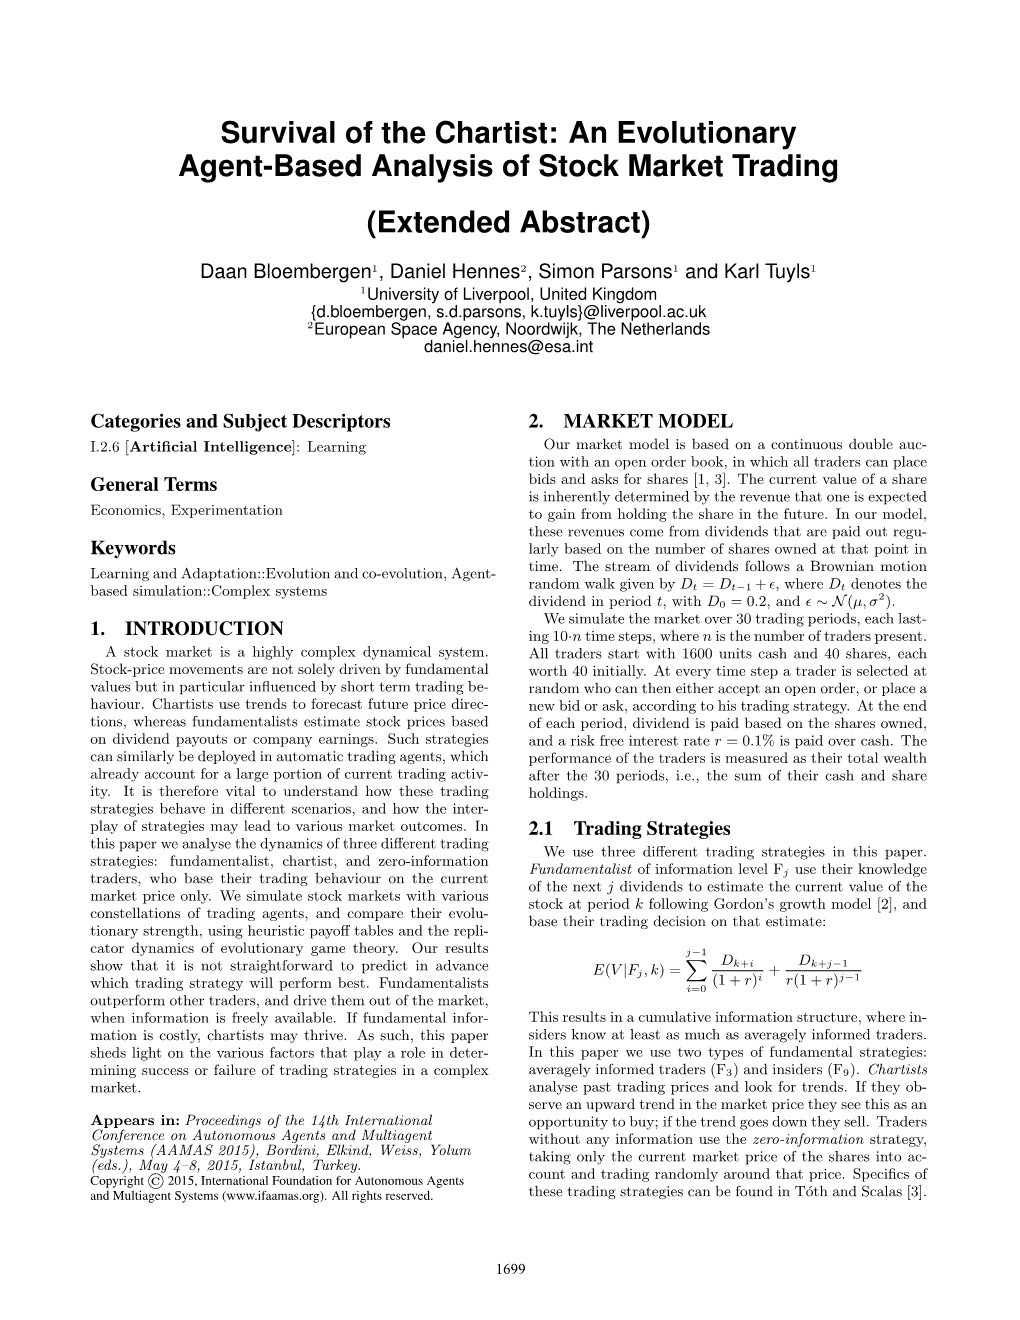 An Evolutionary Agent-Based Analysis of Stock Market Trading (Extended Abstract)